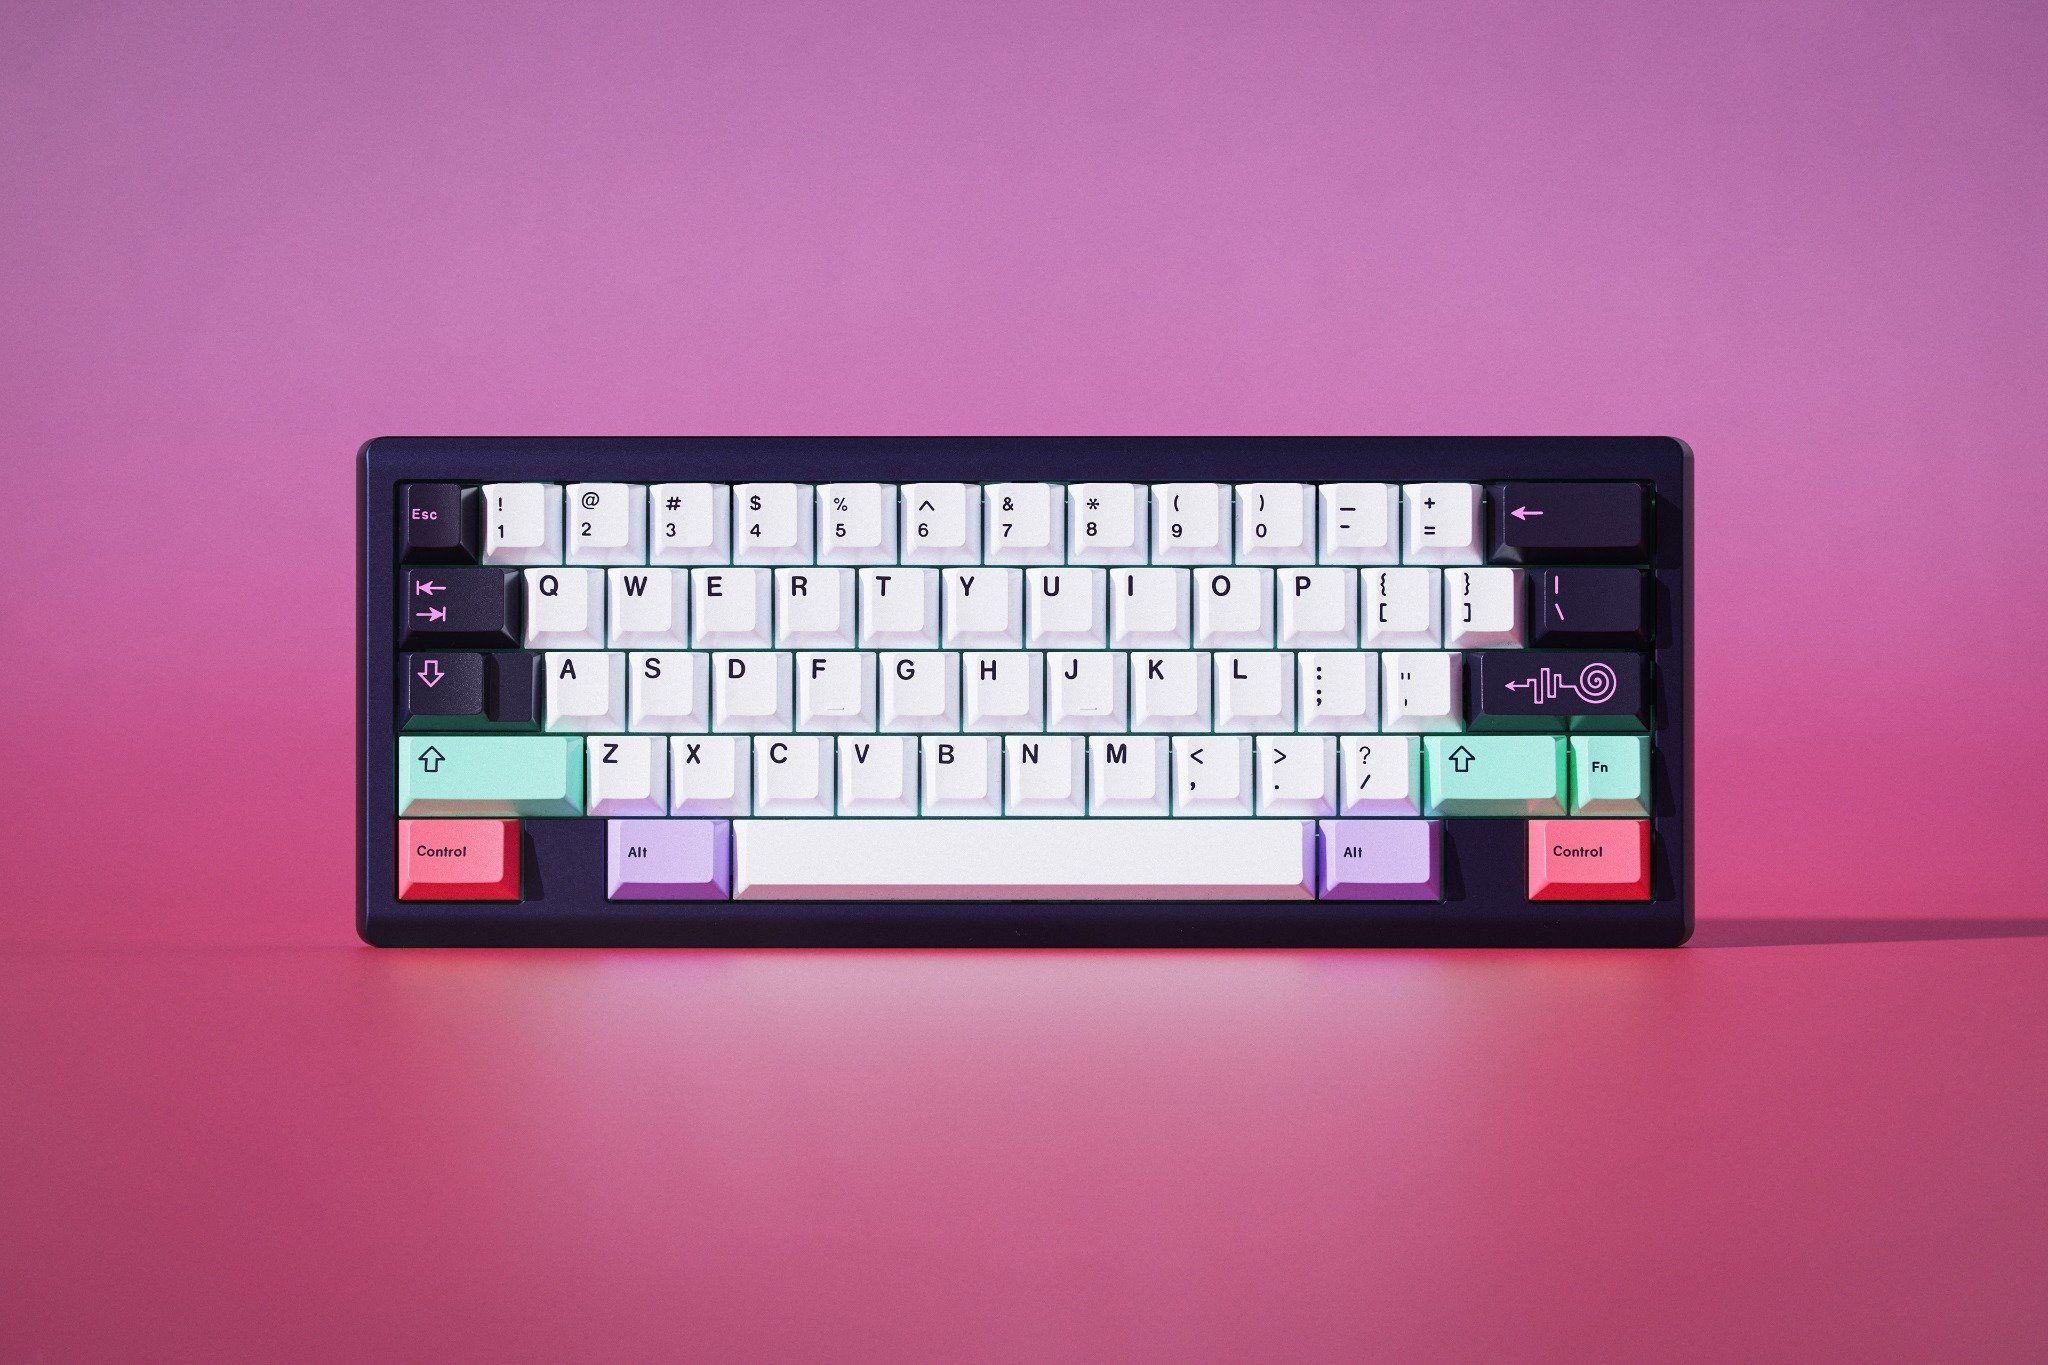  [In-Stock] GMK Chaos Theory 